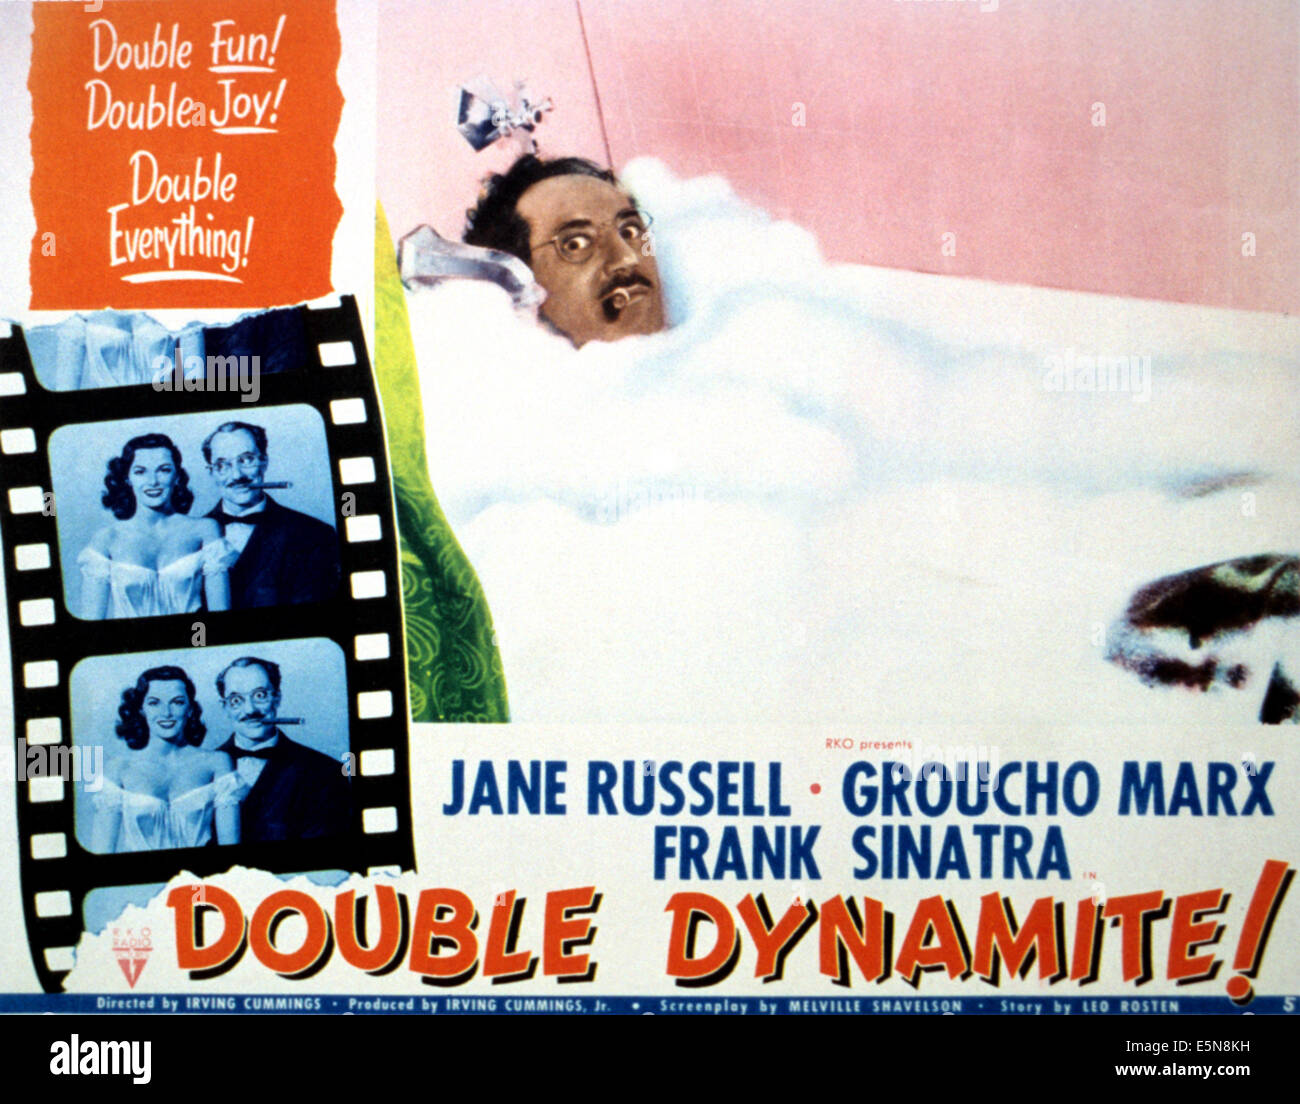 DOUBLE DYNAMINTE, from left: Jane russell, Groucho Marx, Groucho Marx (in bathtub), 1951 Stock Photo